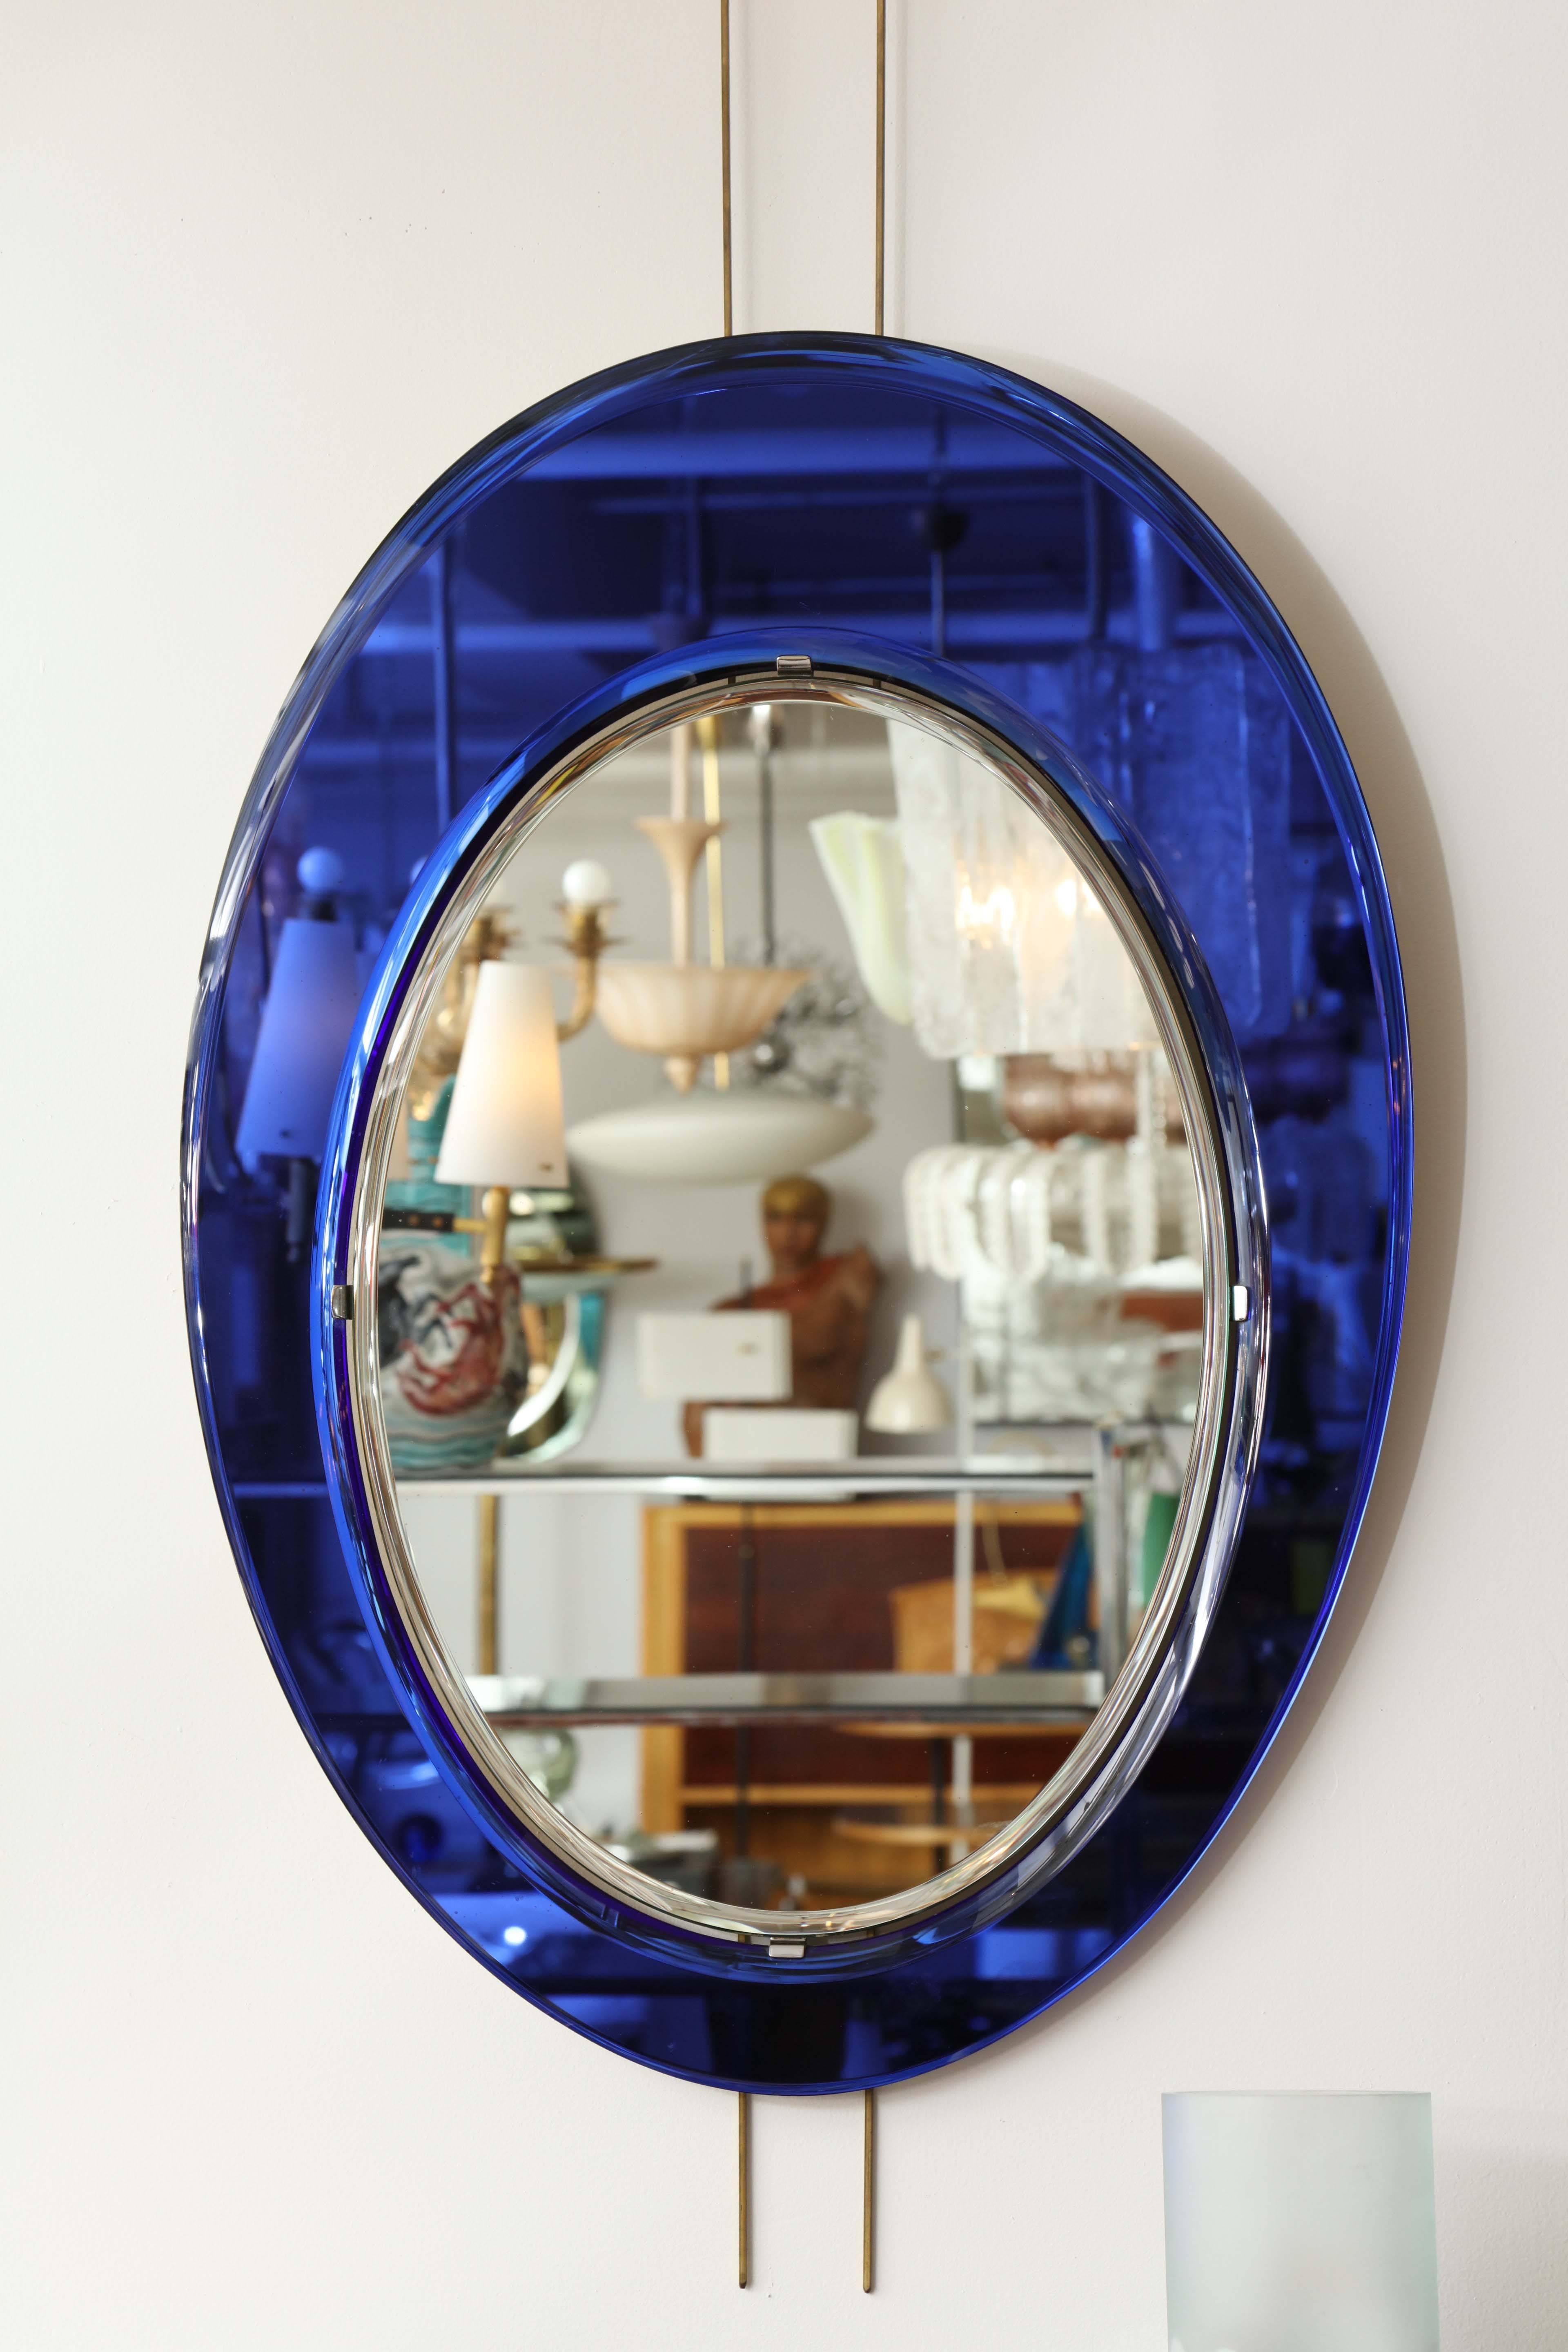 Stunning oval violet mirror made in Italy 1955 by Cristal Arte, unusual color and form, great quality, a real beauty.
 